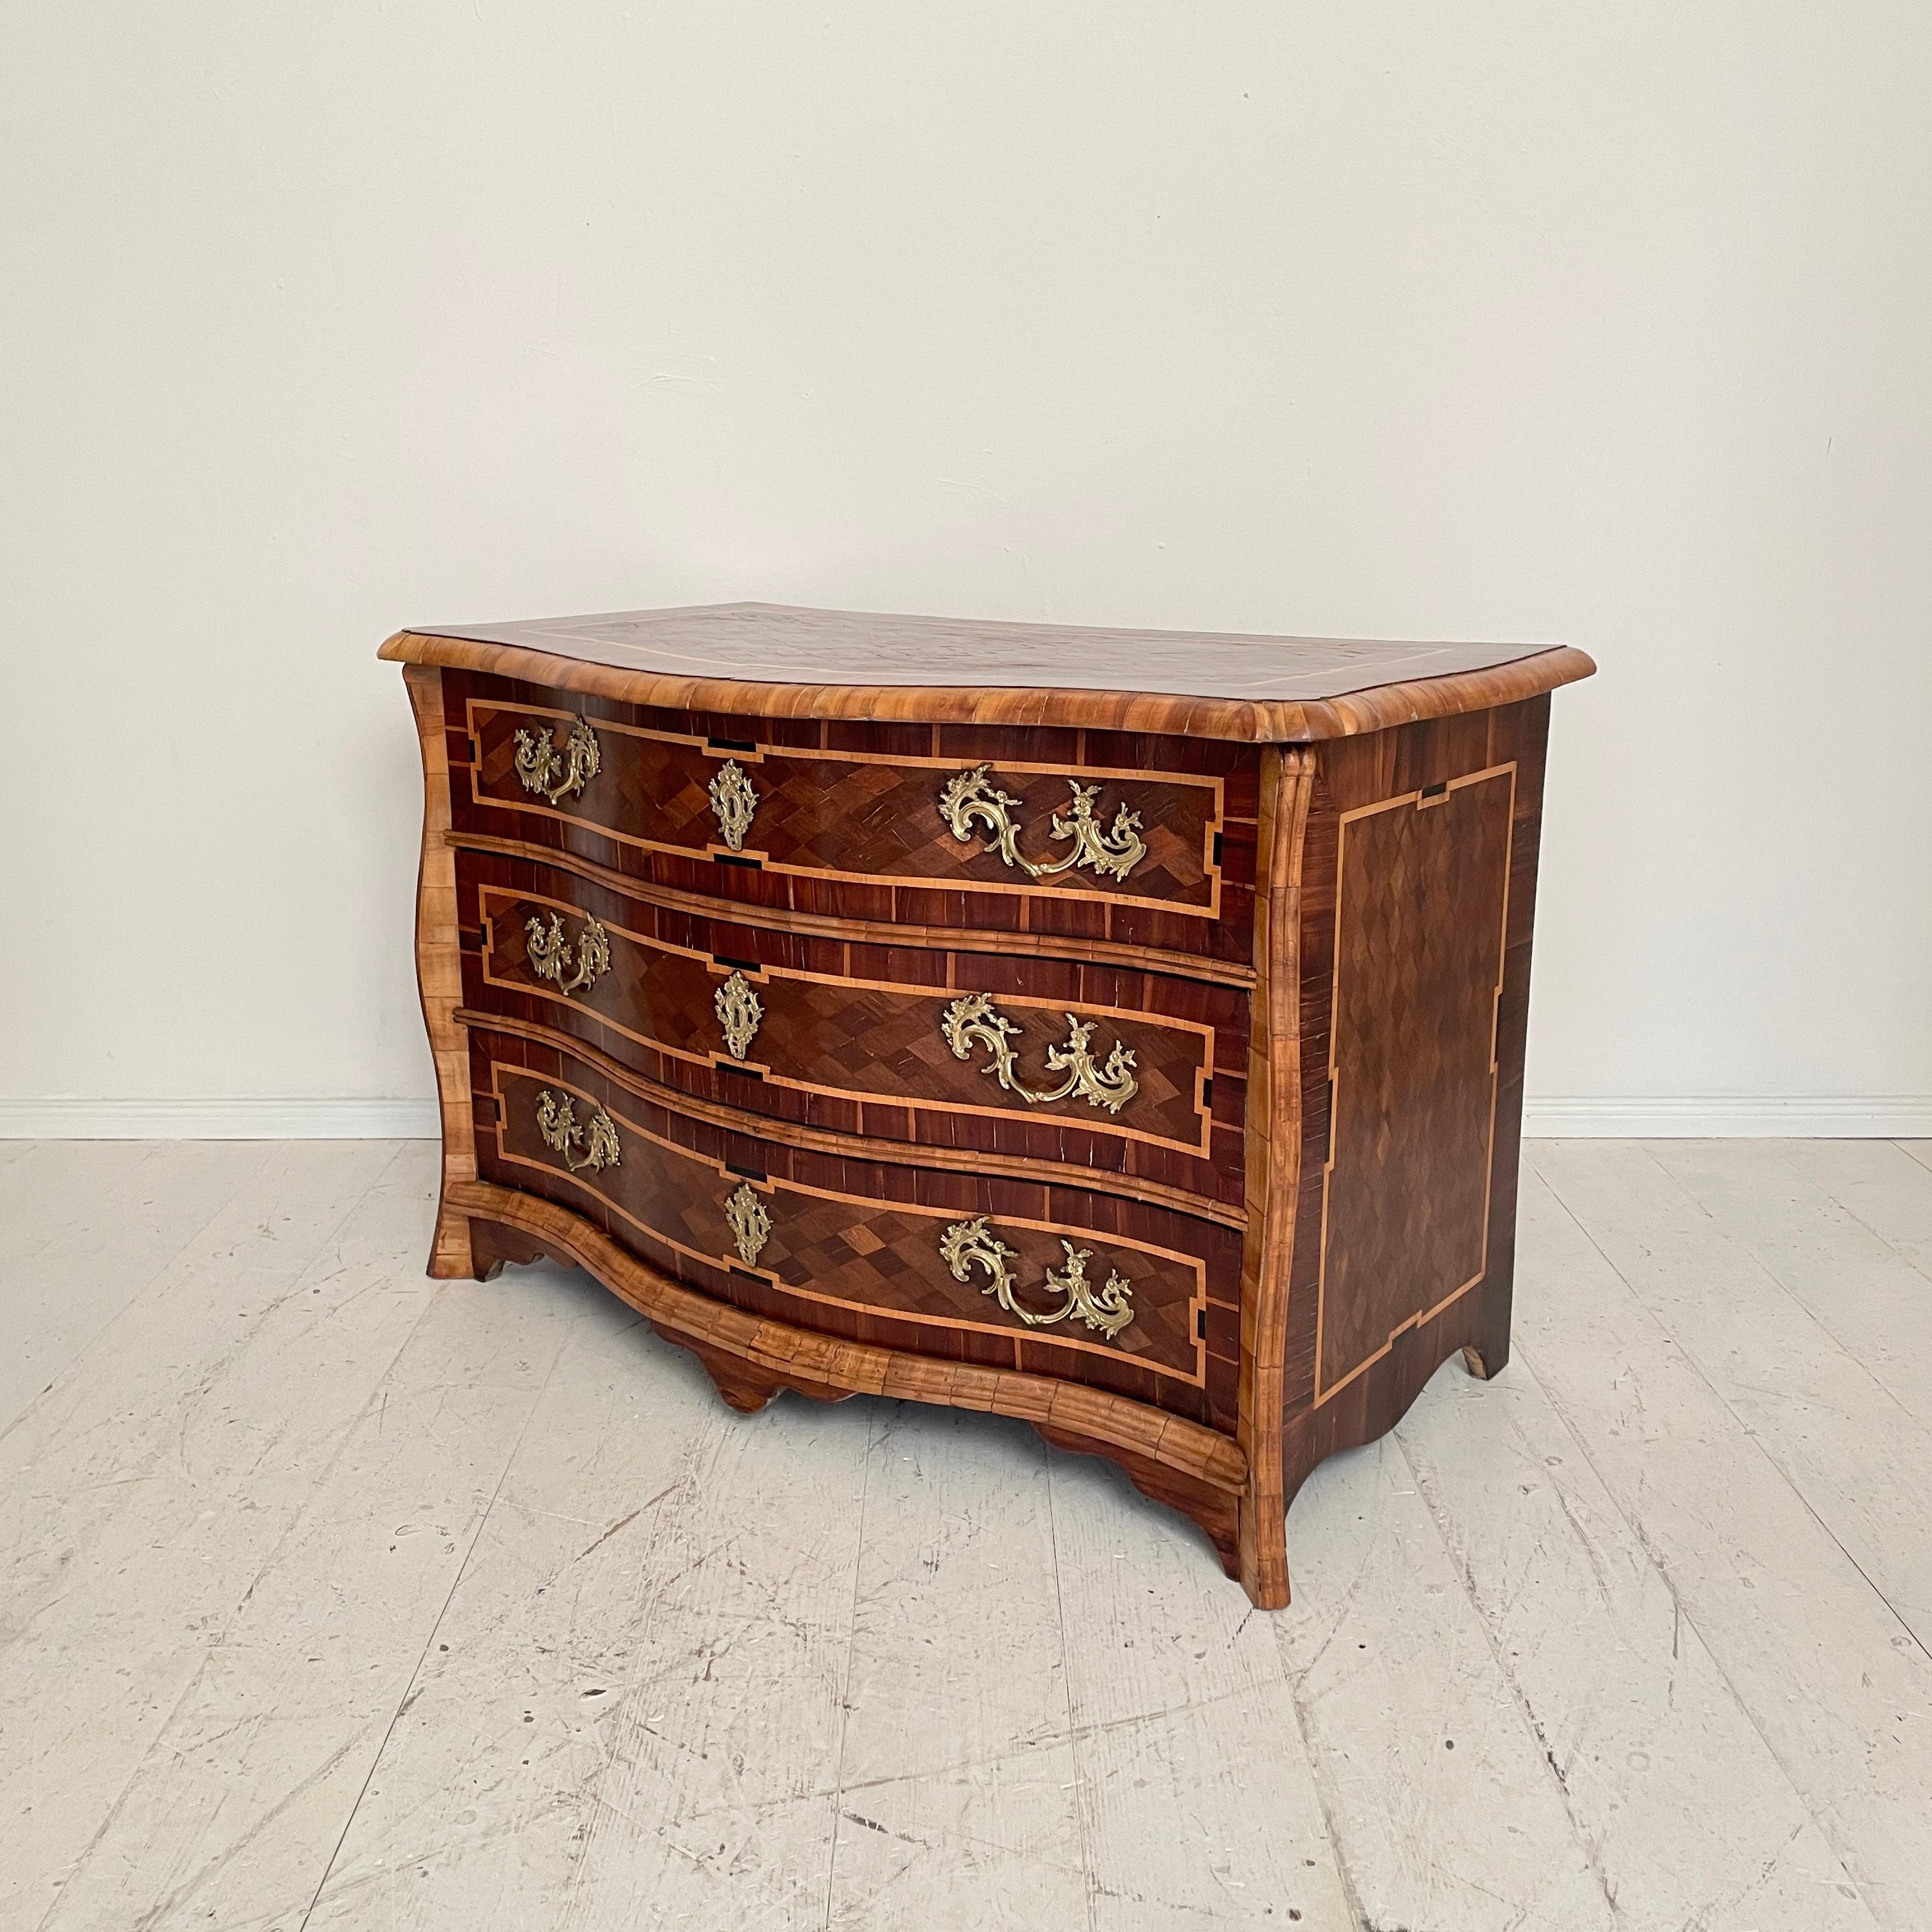 18th Century Dresdner Baroque Commode in Brown Walnut and Amaranth, Around 1760 For Sale 1